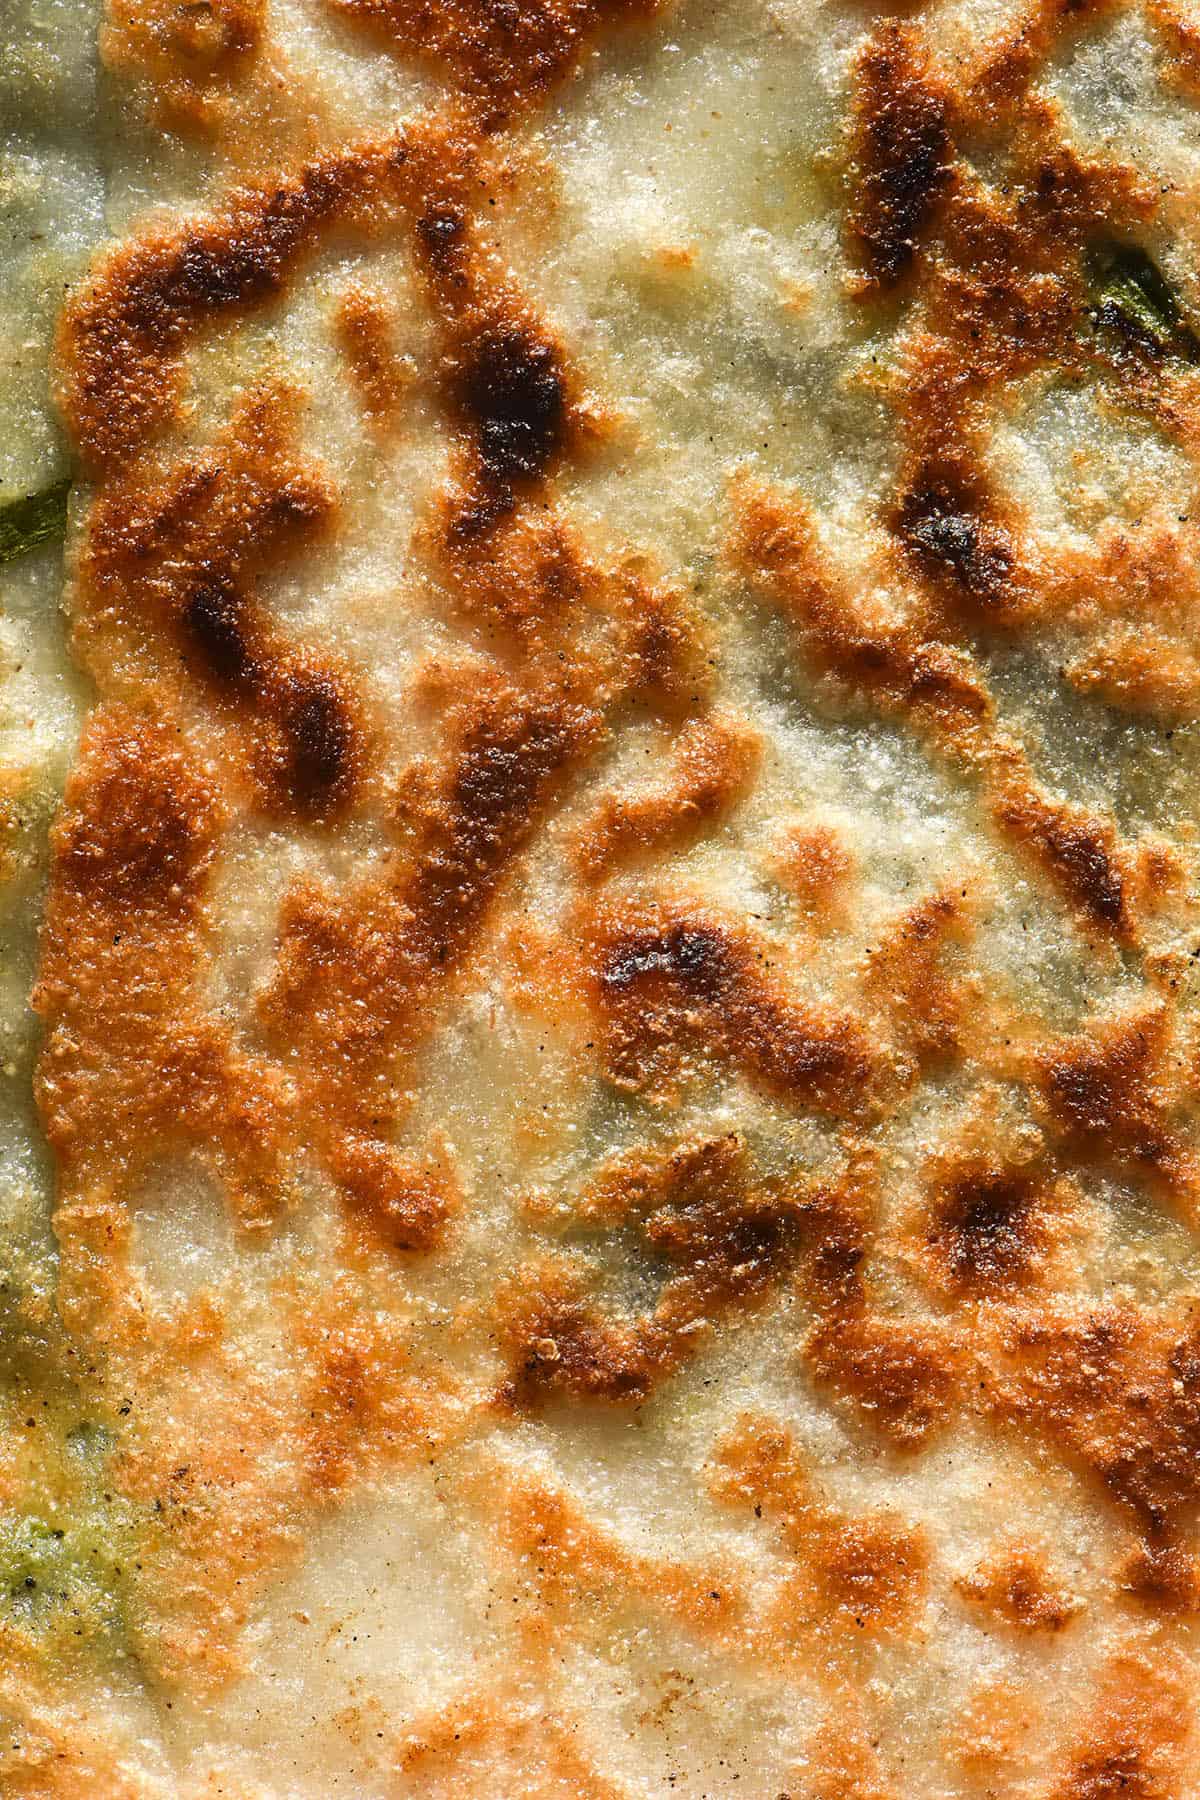 A macro close up image of a golden brown gluten free gozleme